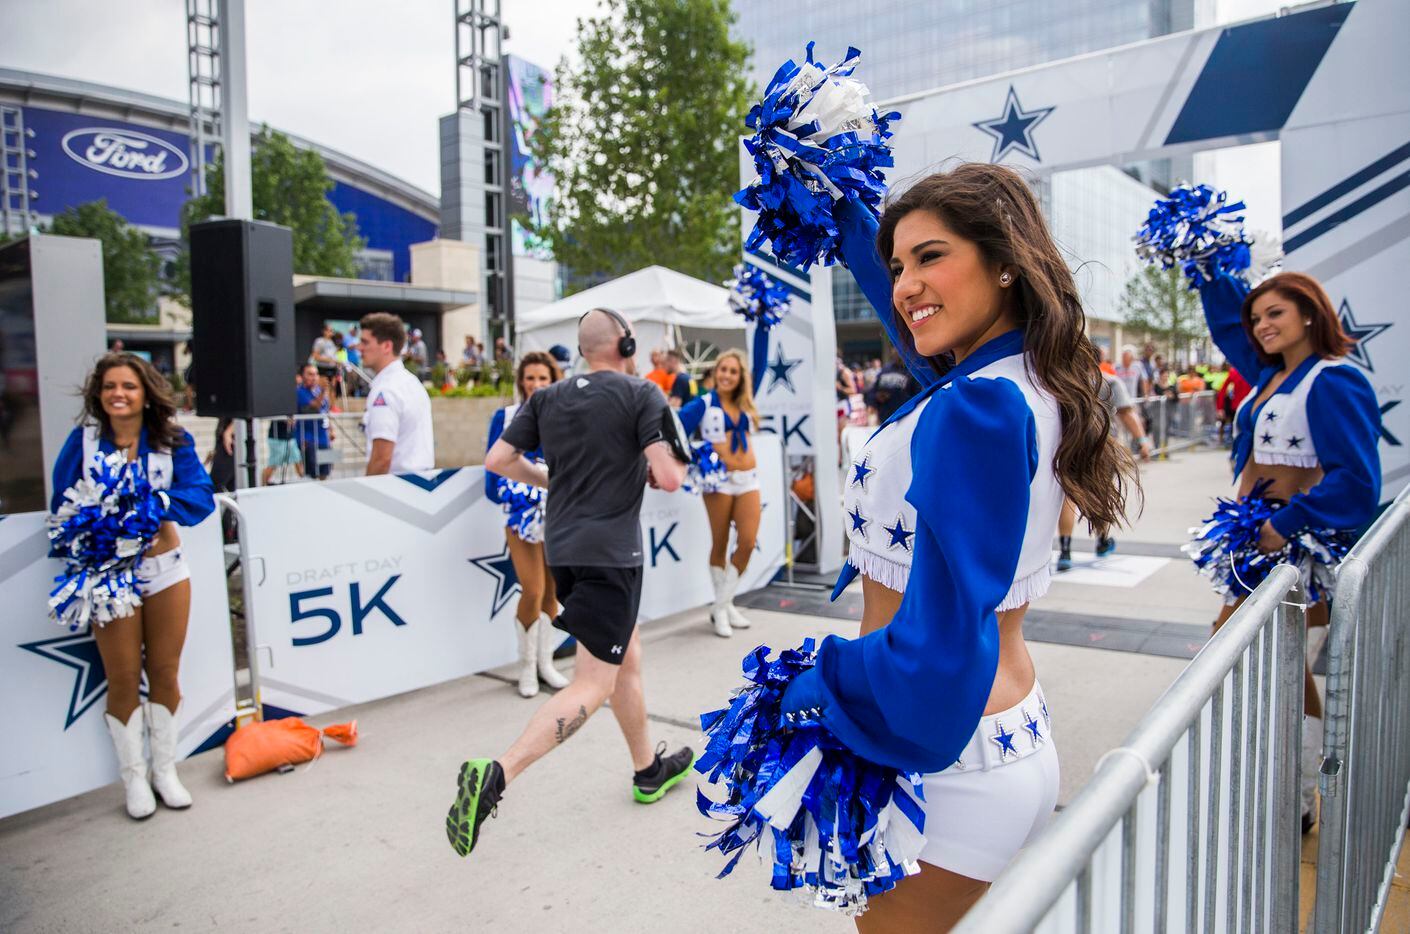 Dallas Cowboys cheerleader Selina Flores (center) and other cheerleaders encourage runners as they reach the finish line of the Dallas Cowboys Draft Day 5K during day three of the Dallas Cowboys' 2017 NFL Draft Party on Saturday, April 29, 2017, at The Star in Frisco.